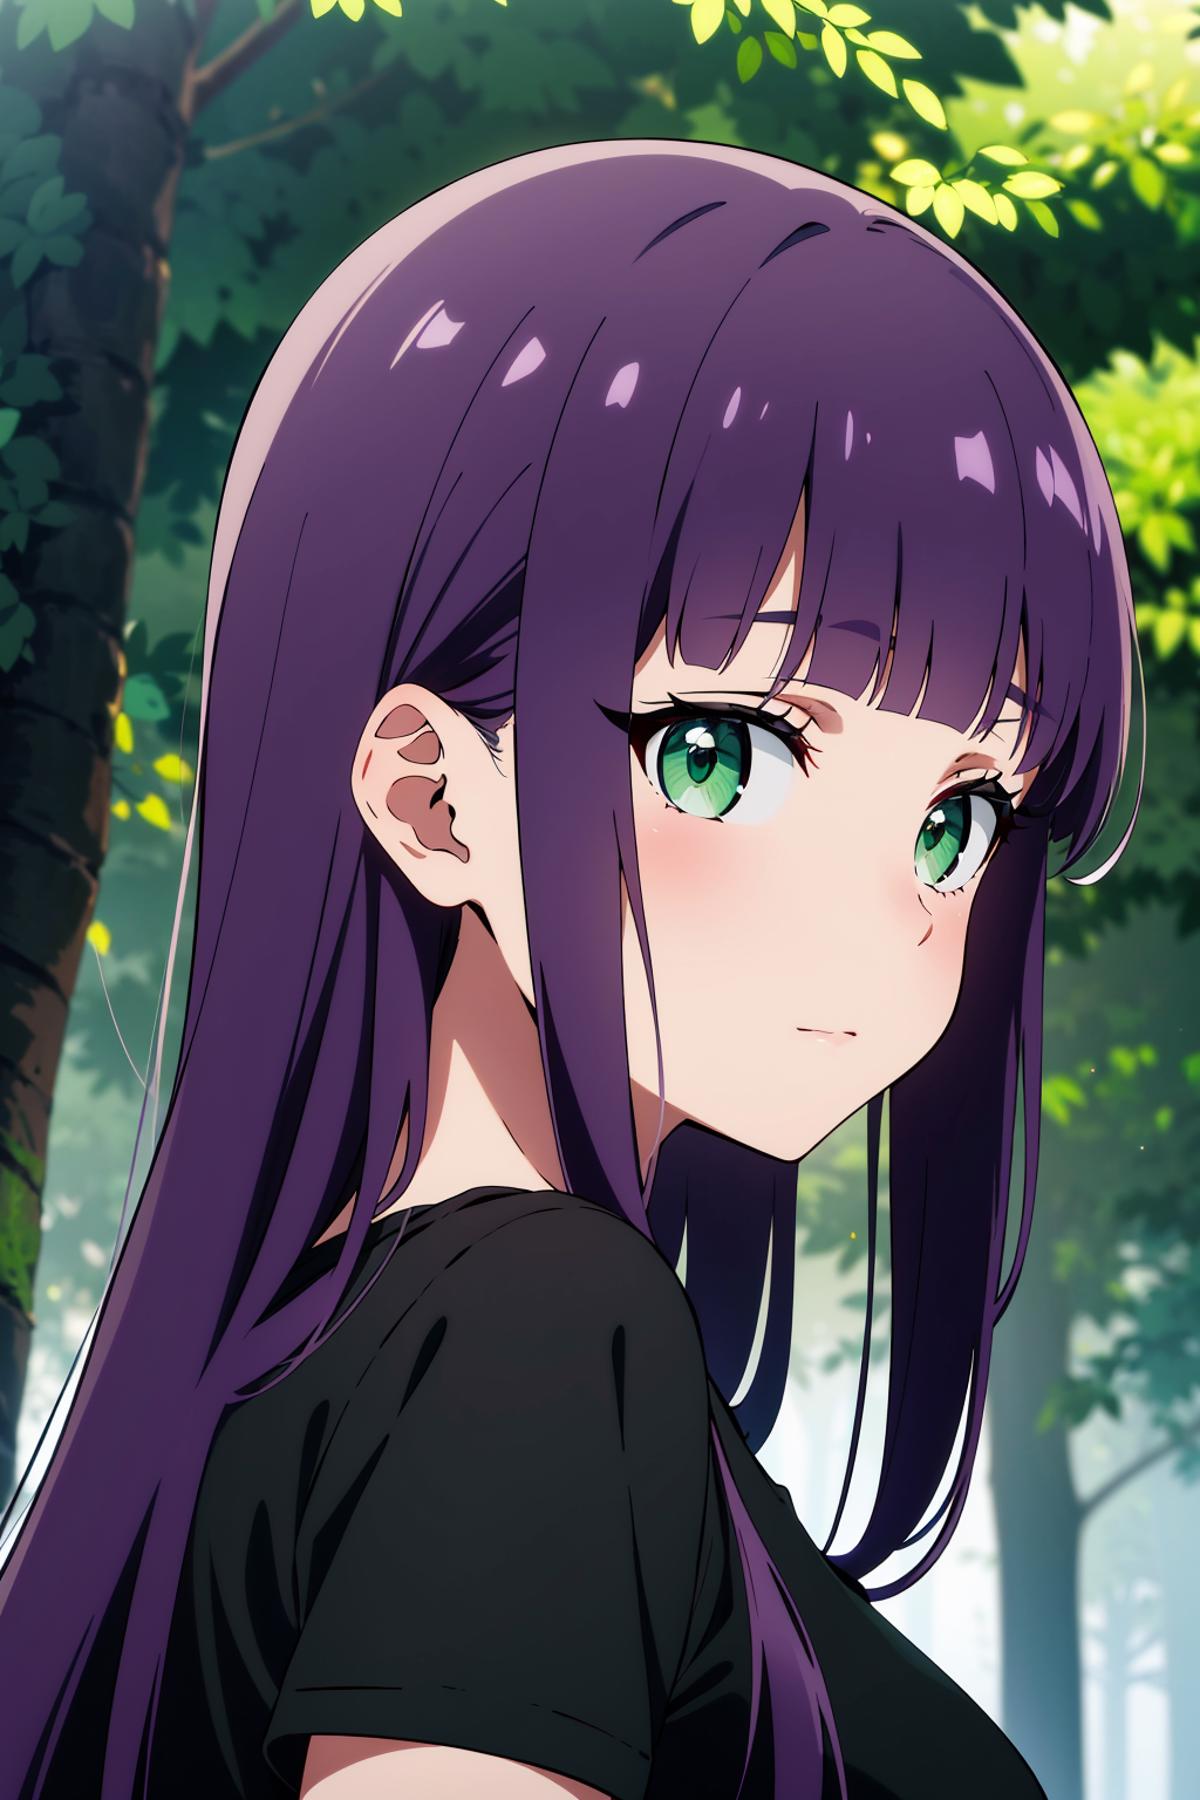 A girl with long purple hair and green eyes wearing a black shirt.